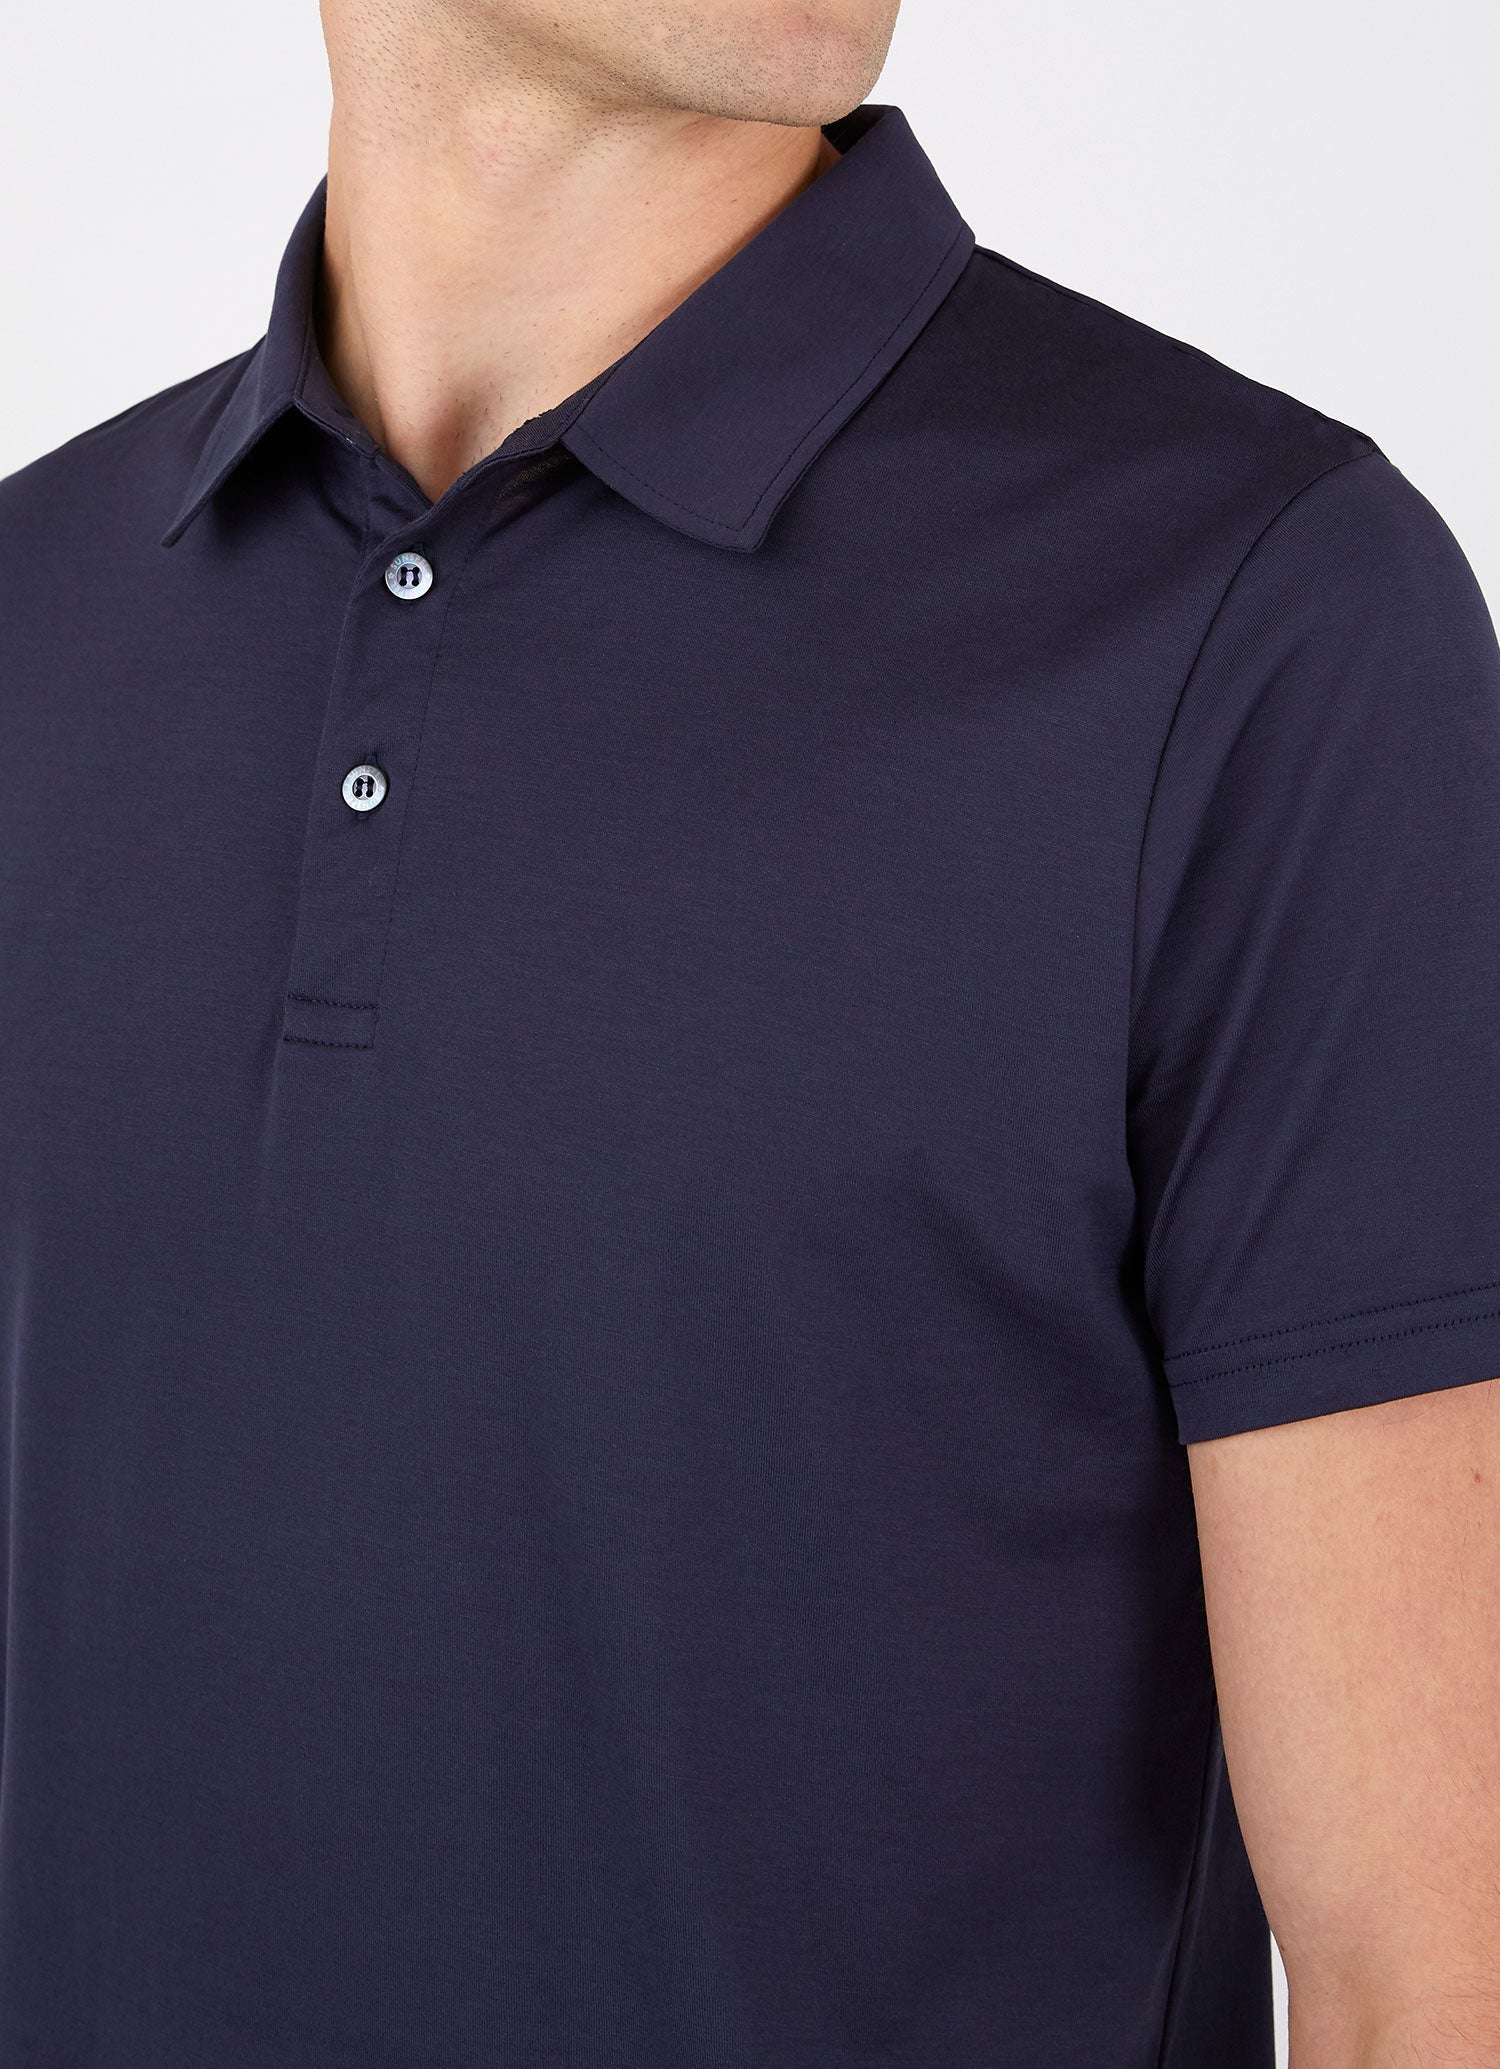 Men's Jersey Classic Polo Shirt in Navy